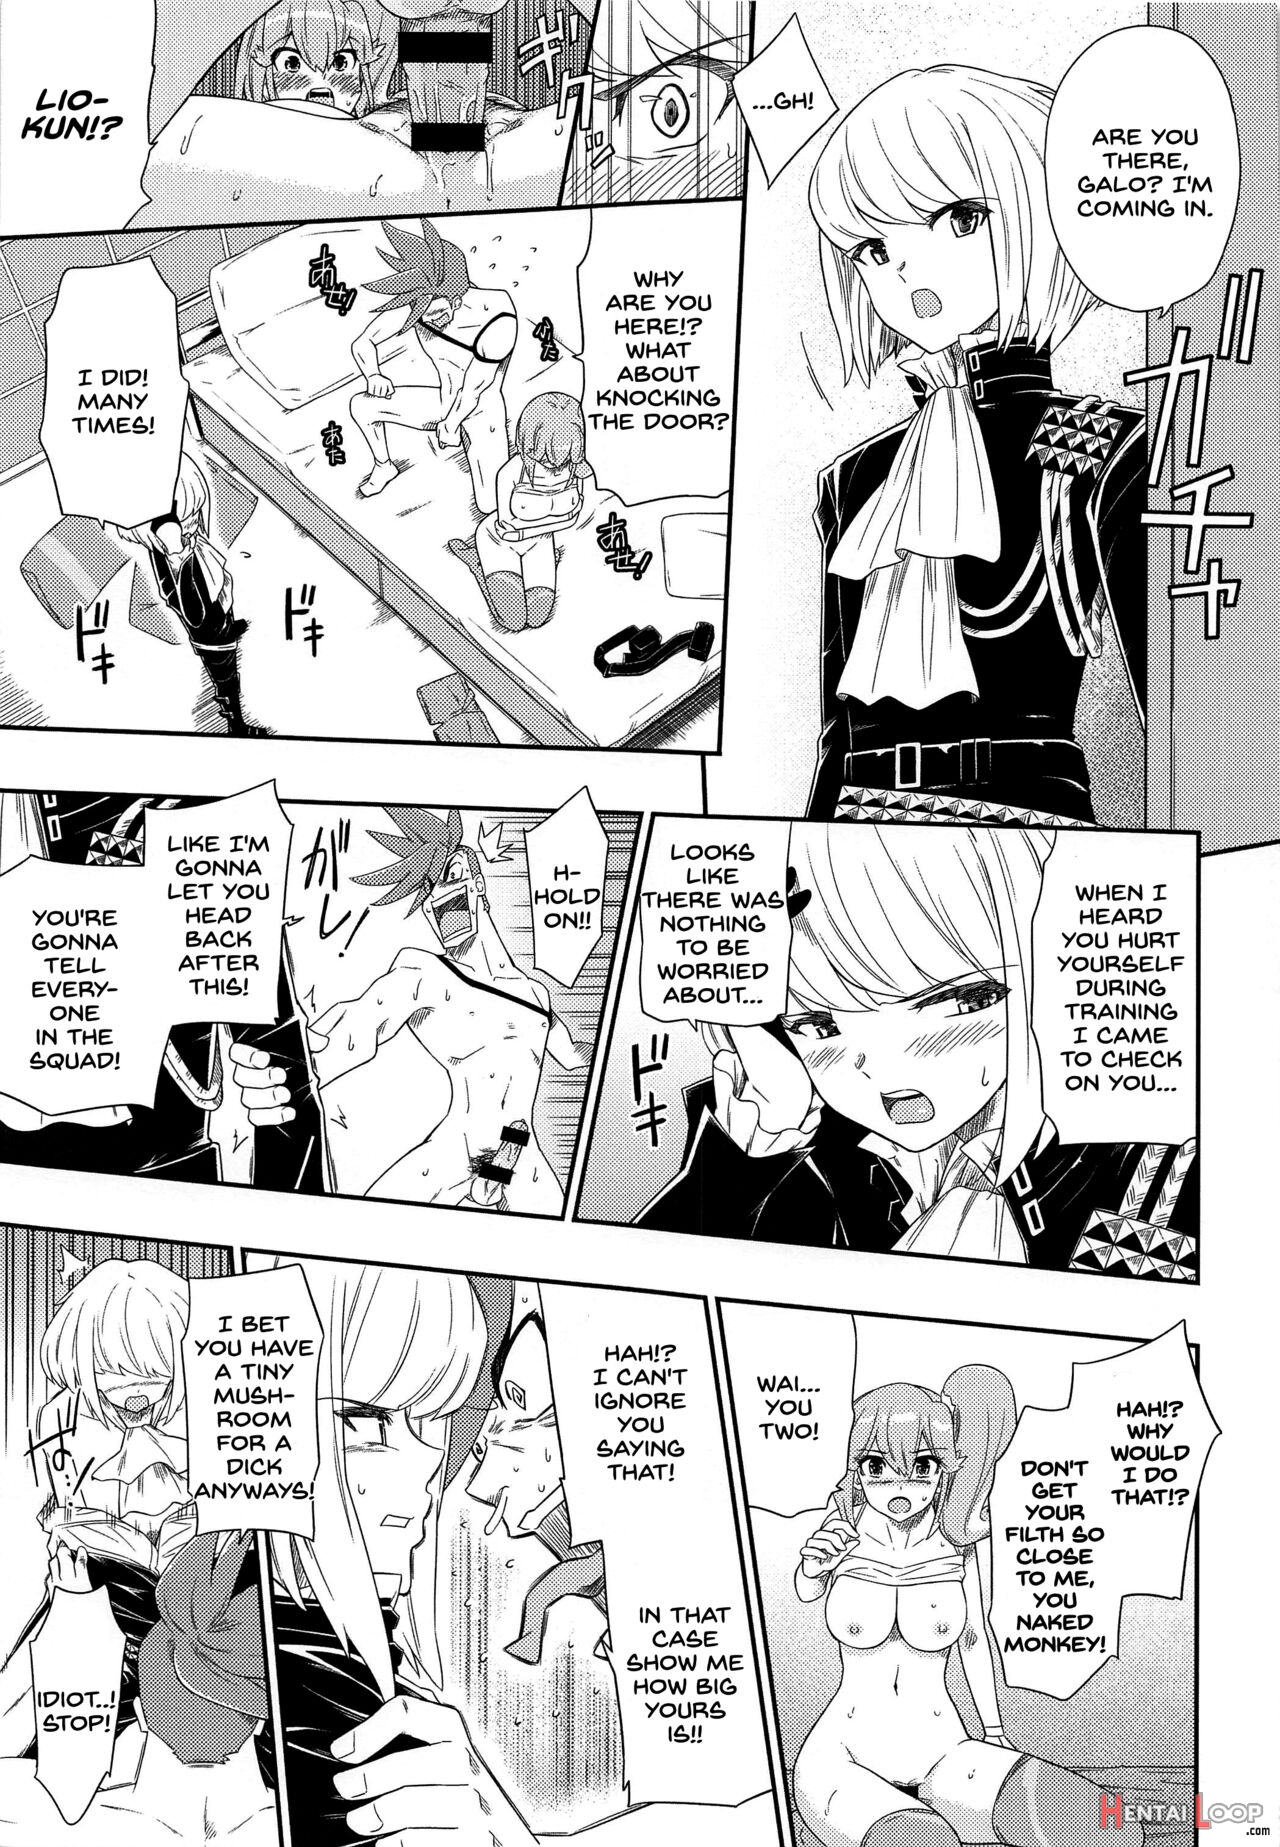 Eromare - Suddenly 3p Sex Is Happening... page 4